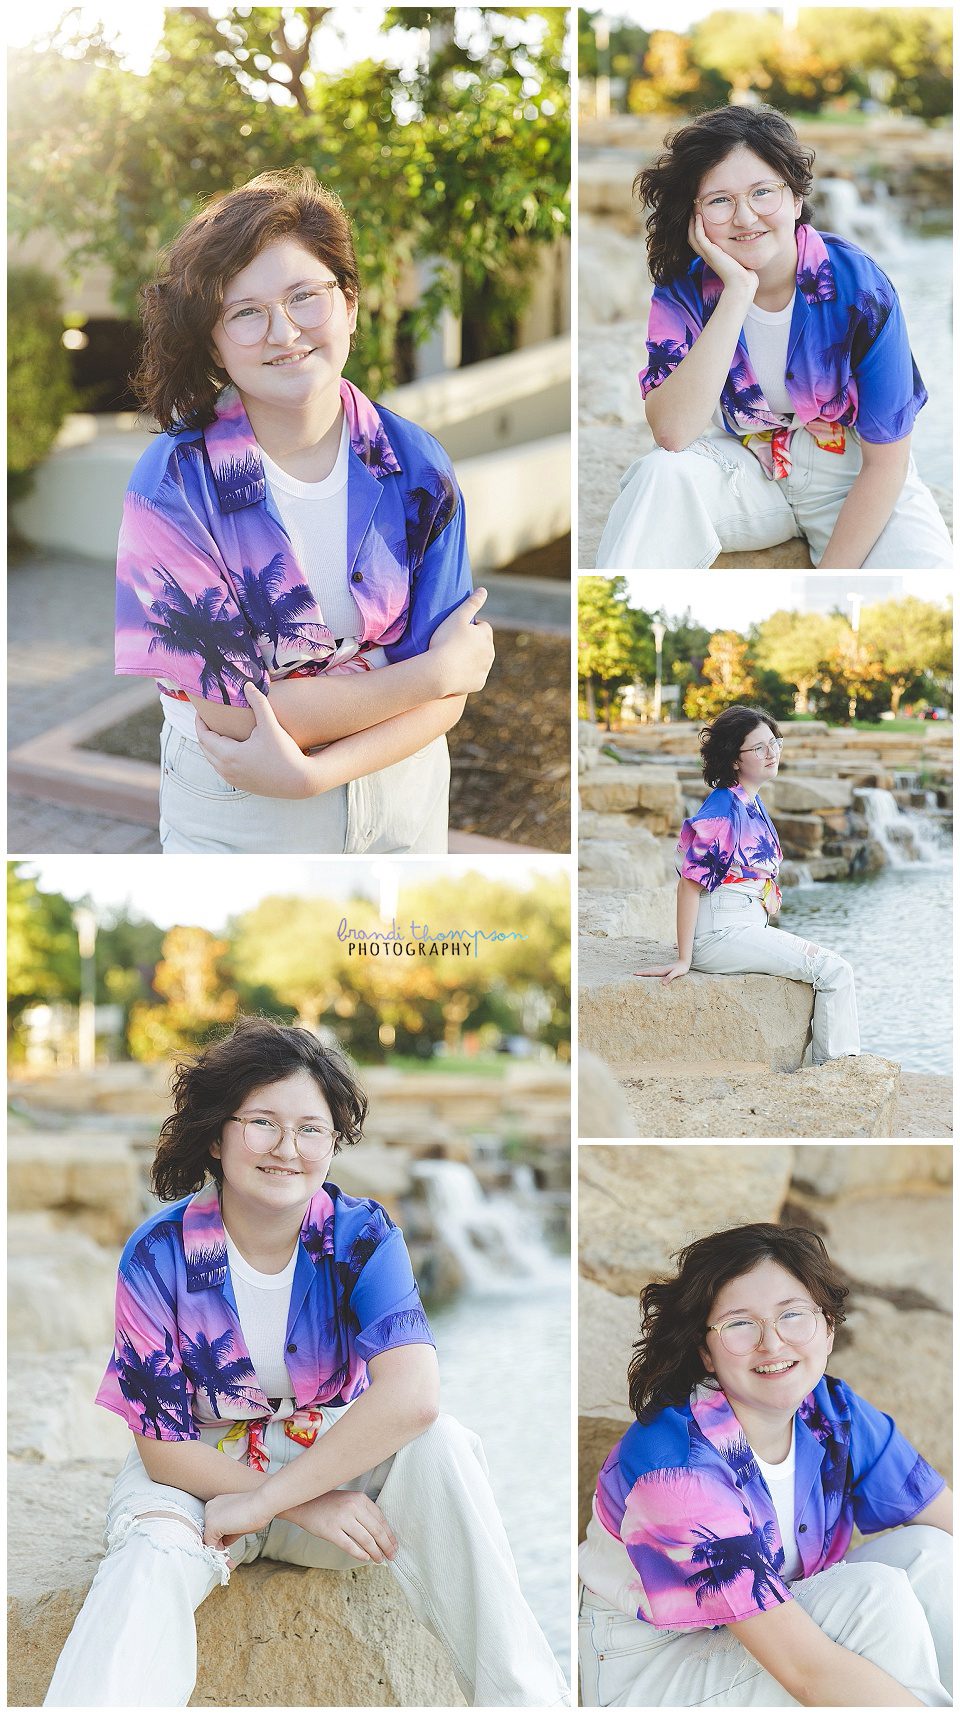 collage of outdoor photos of a light skinned tween girl with short, asymetric curly hair. She is wearing a pink and purple shirt with palm trees, and light colored jeans